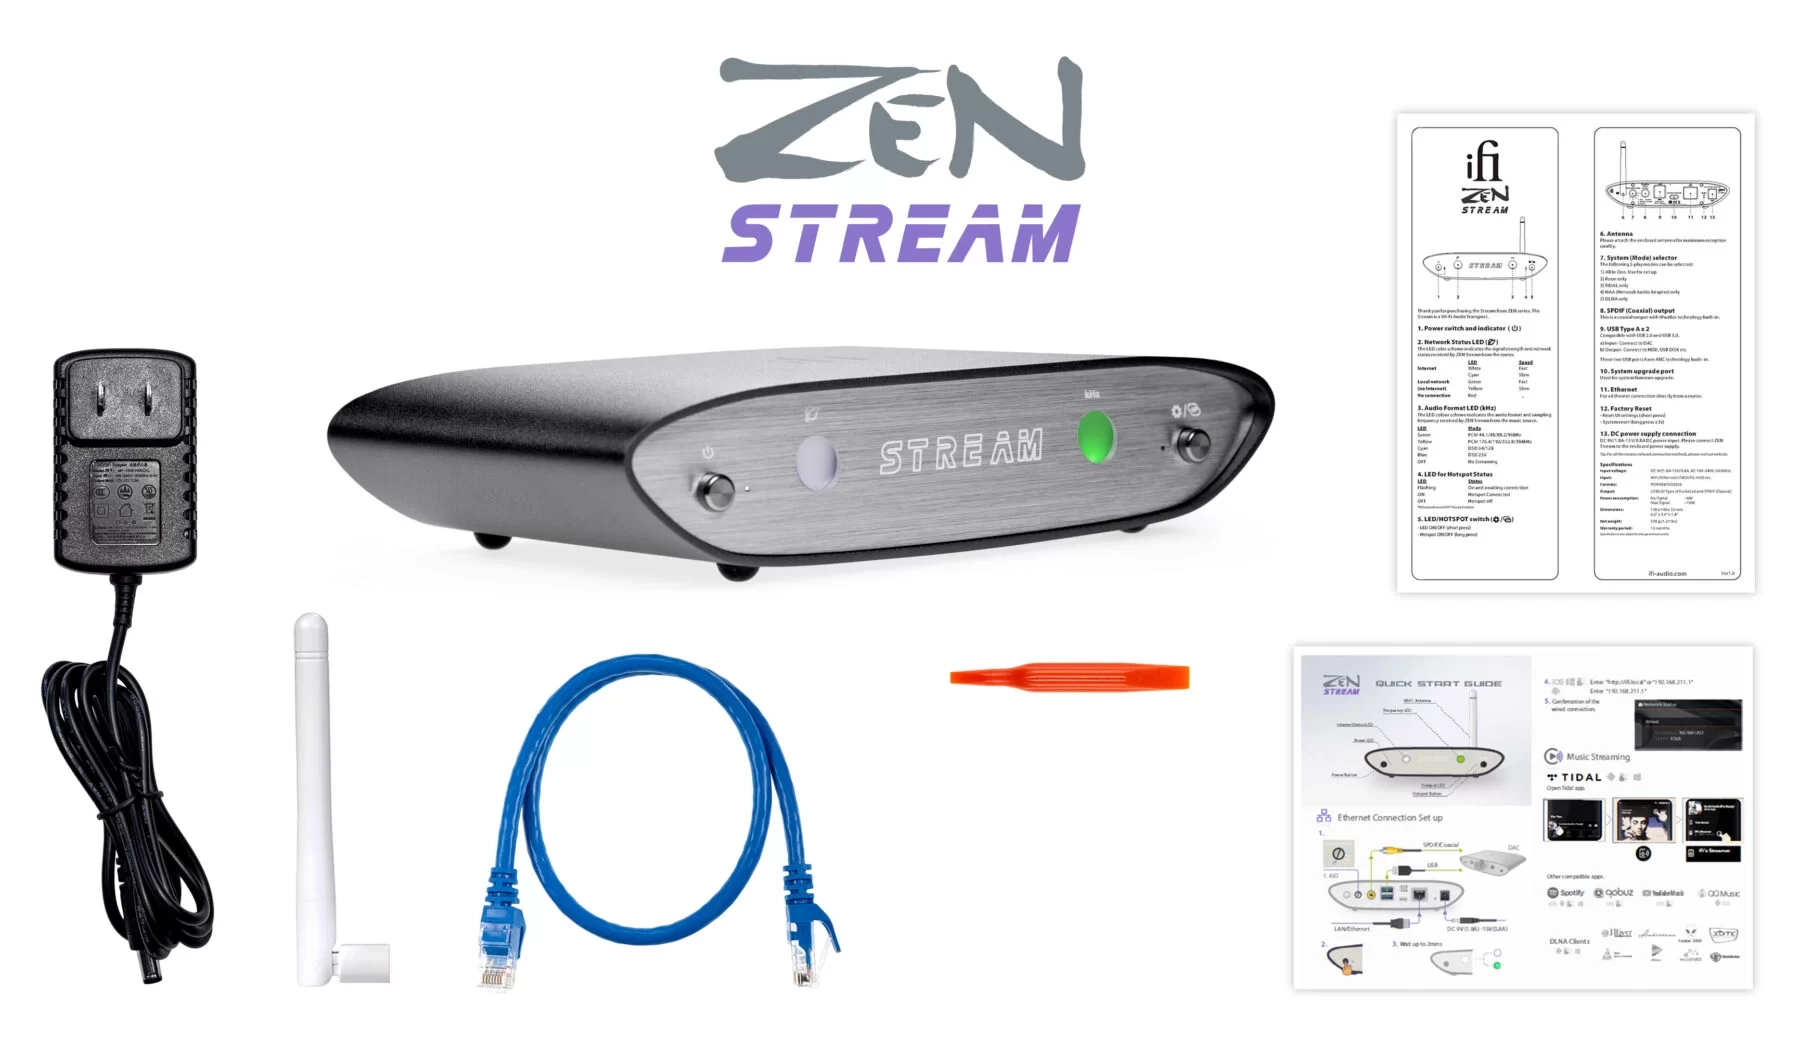 ZEN Stream Connection Guide front banner